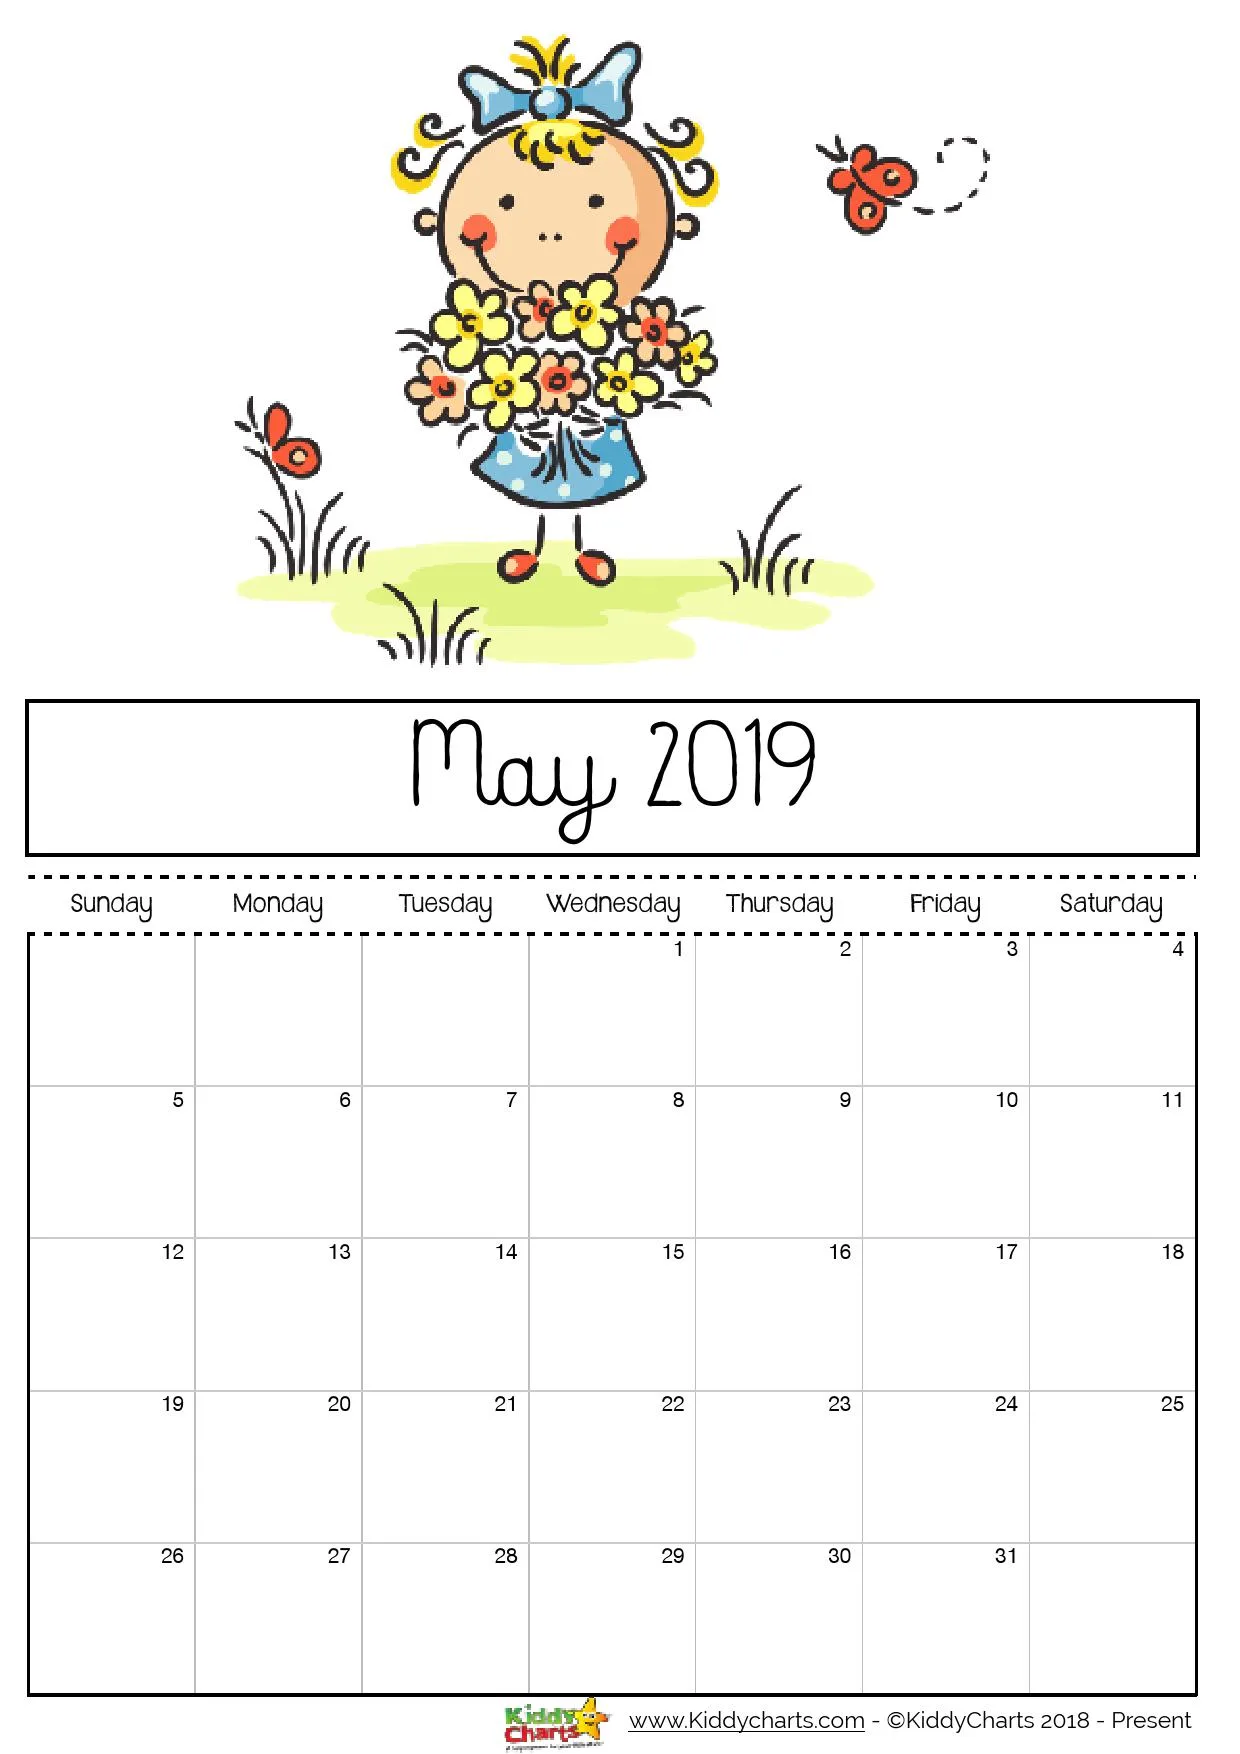 May printable 2019 calendar - girl picking flowers, but ones she is meant to of course! #prtintables #kidsprintables #2019calendar